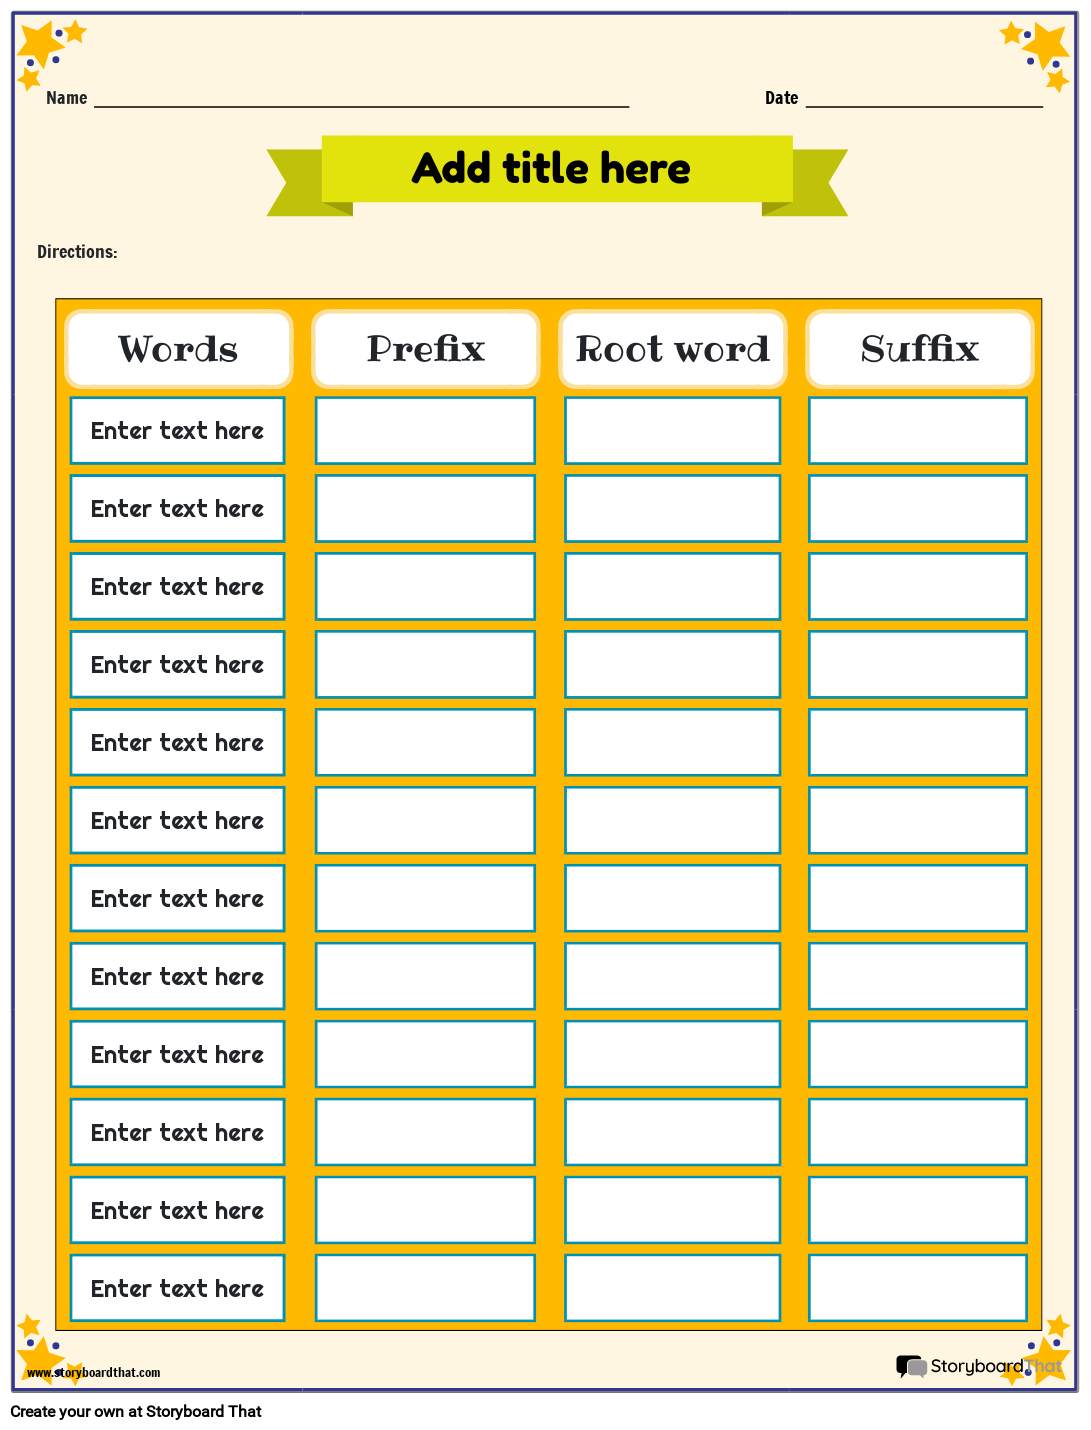 Prefix Suffix and Root Word Activity Worksheet